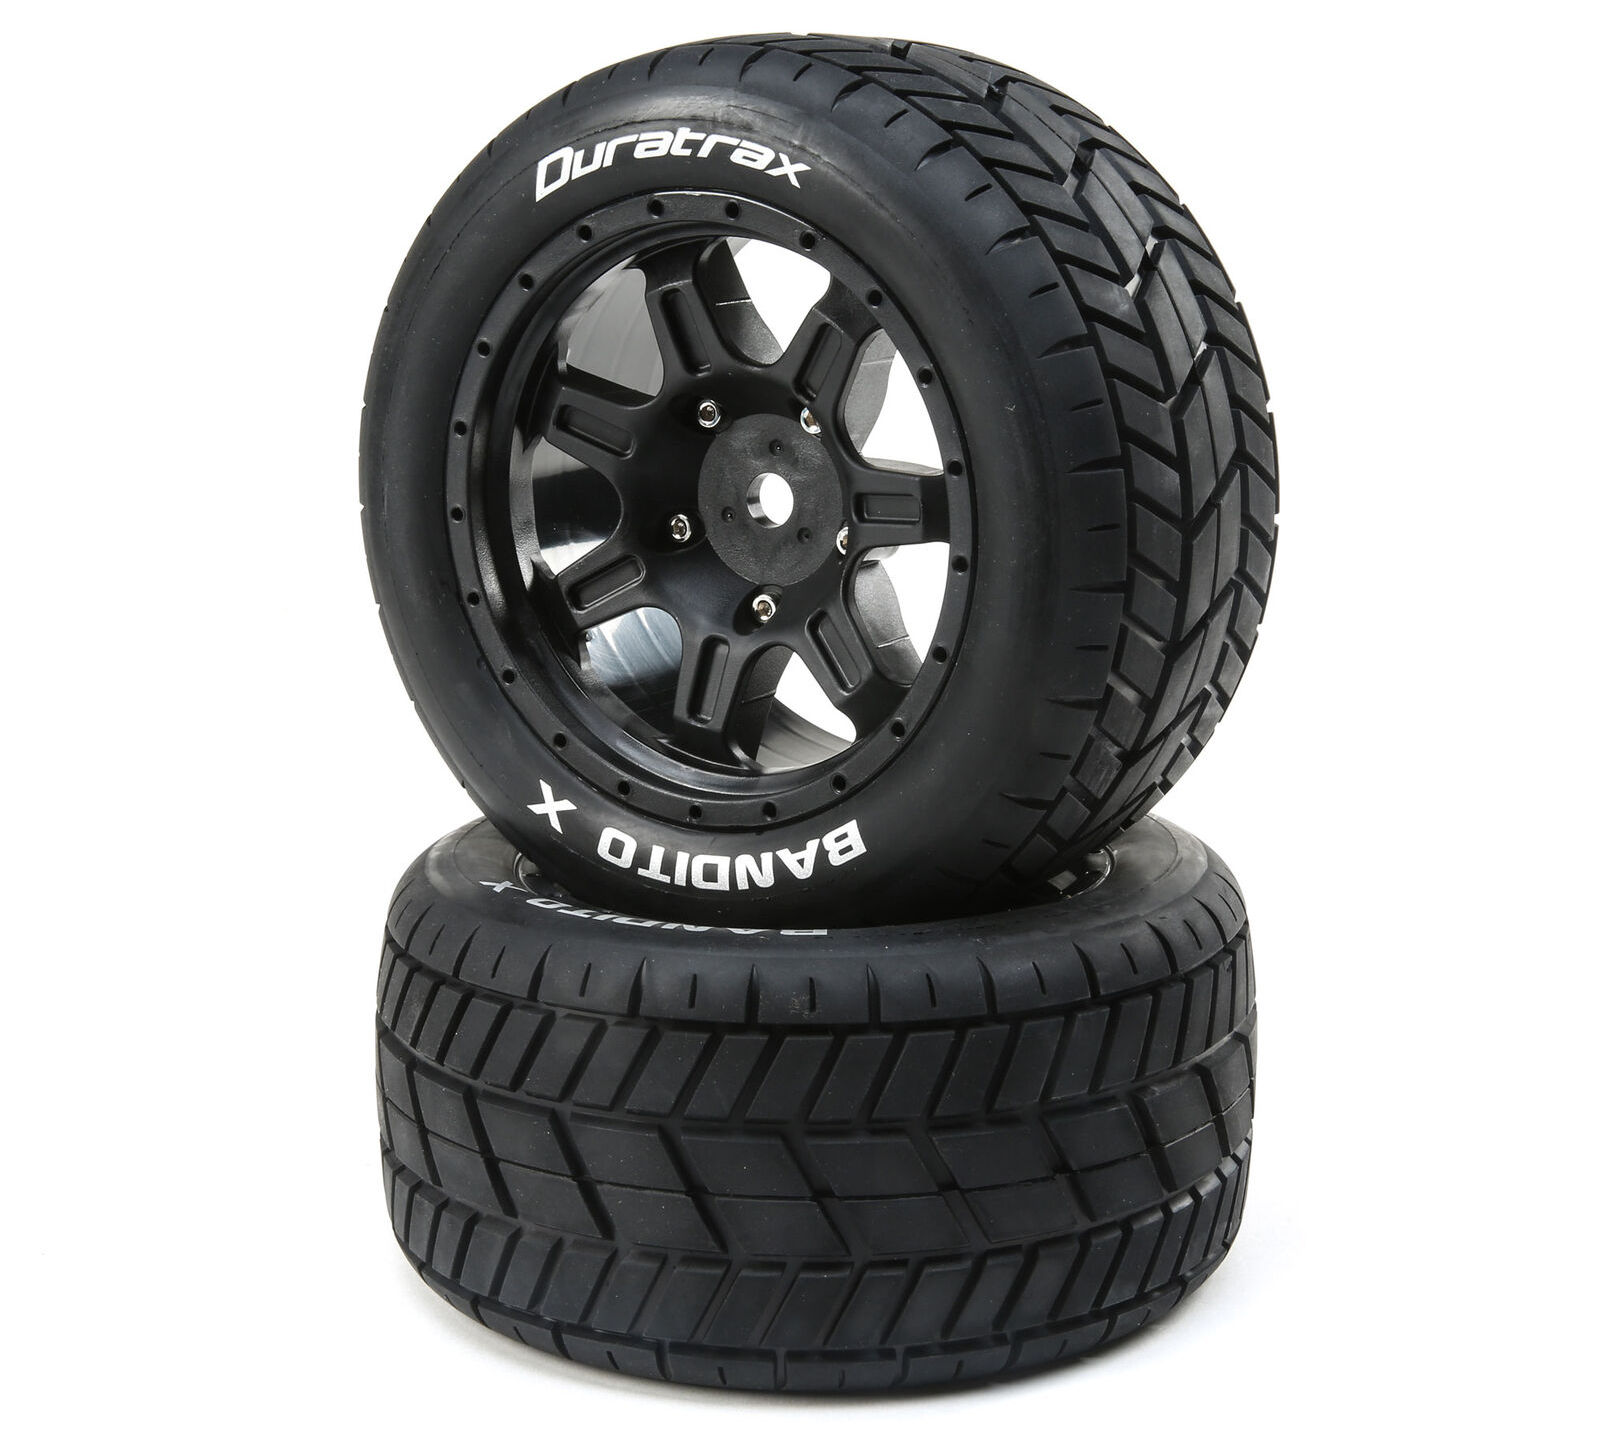 Duratrax DTXC5500 - Bandito X Belted Mounted Tires, 24mm Black 